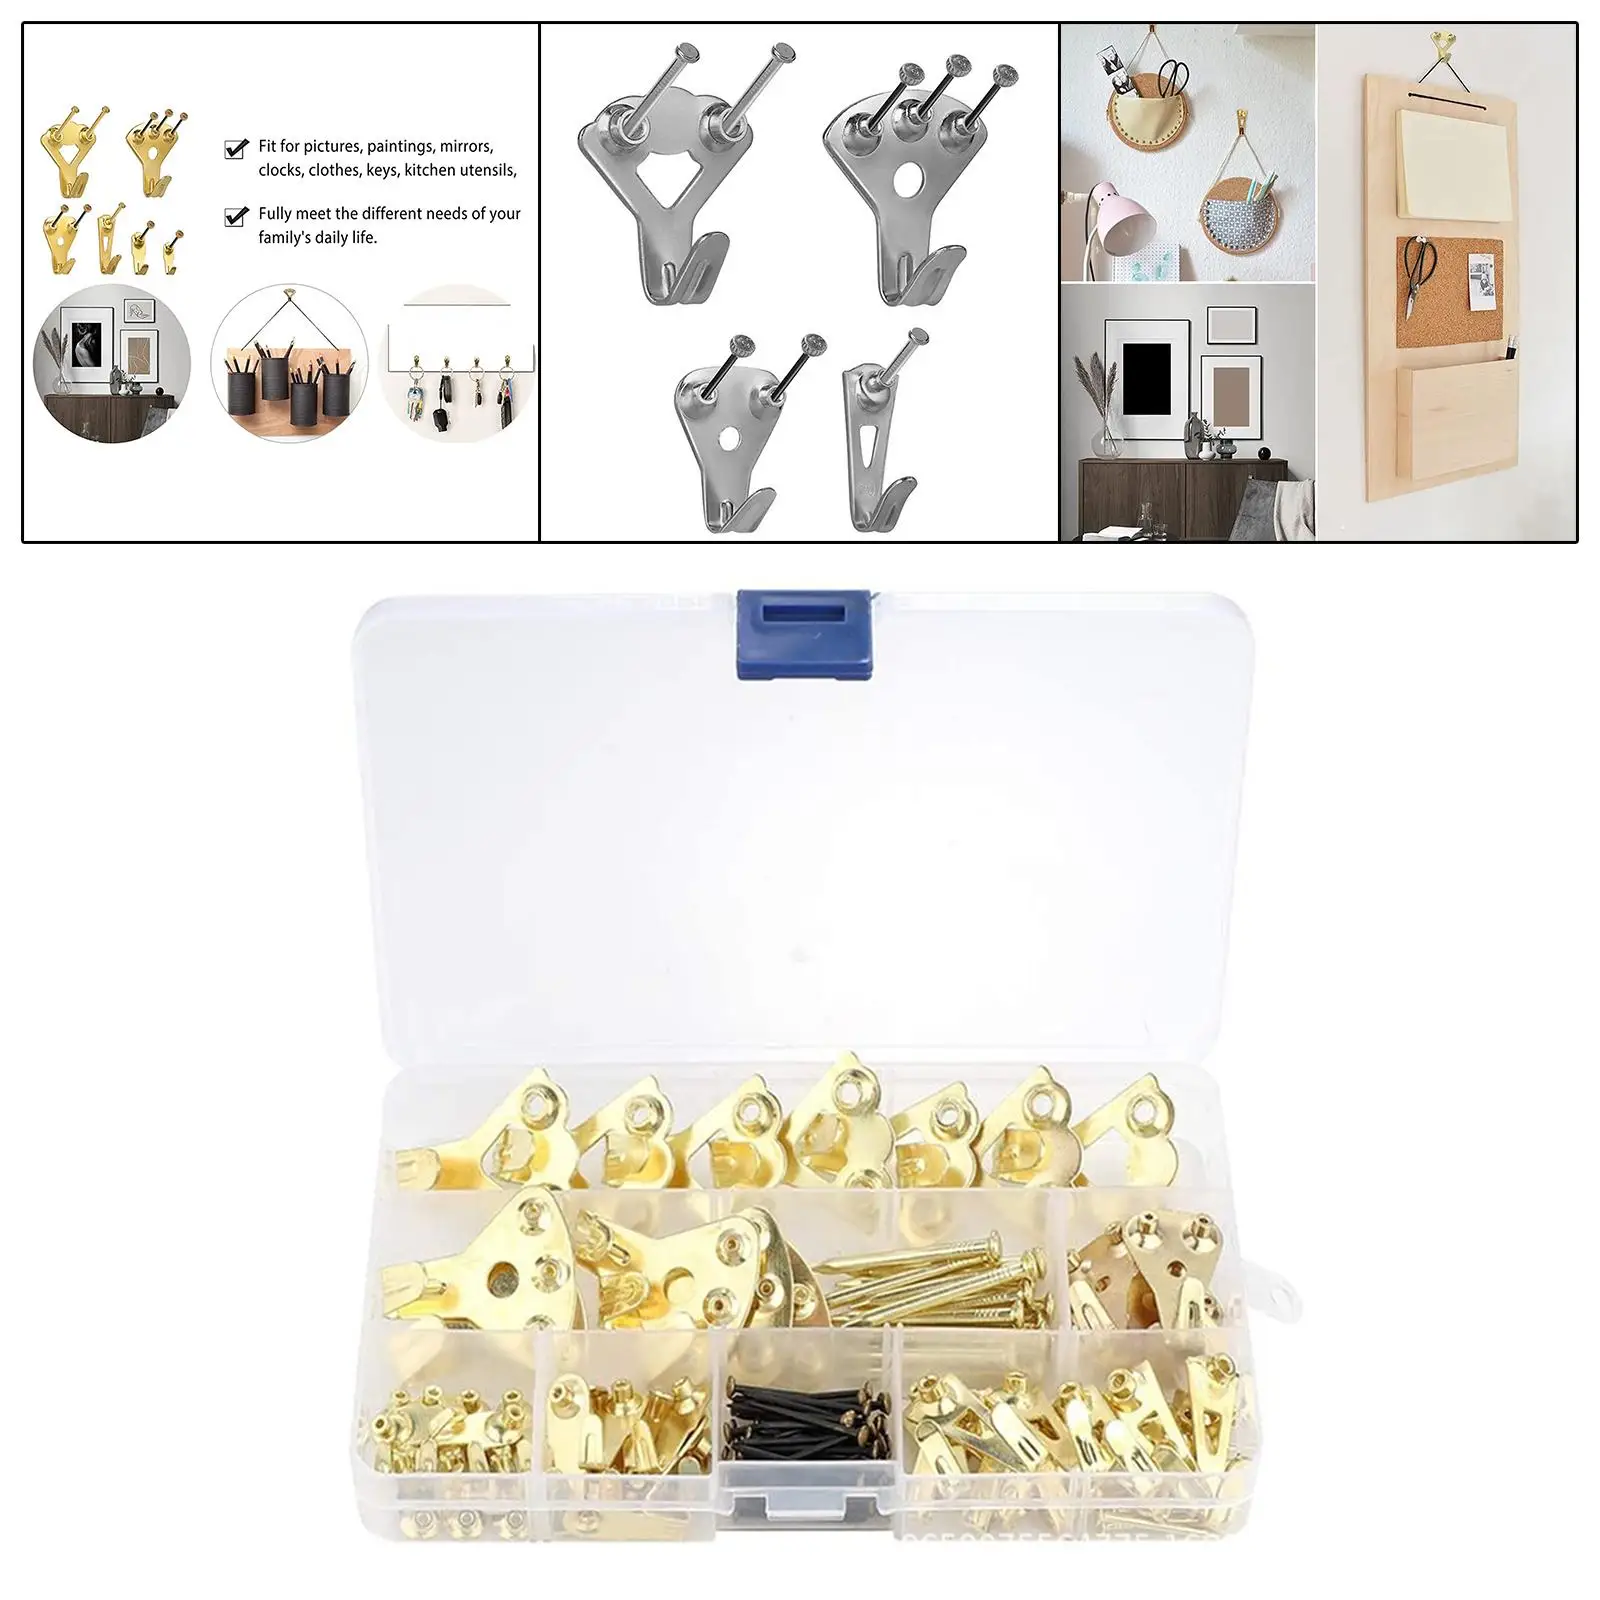 120x Heavy Duty Picture Hangers with Nails Hardware Photo Frame Hooks for Jewelry Artwork Photos Picture Frame Bags Mirror